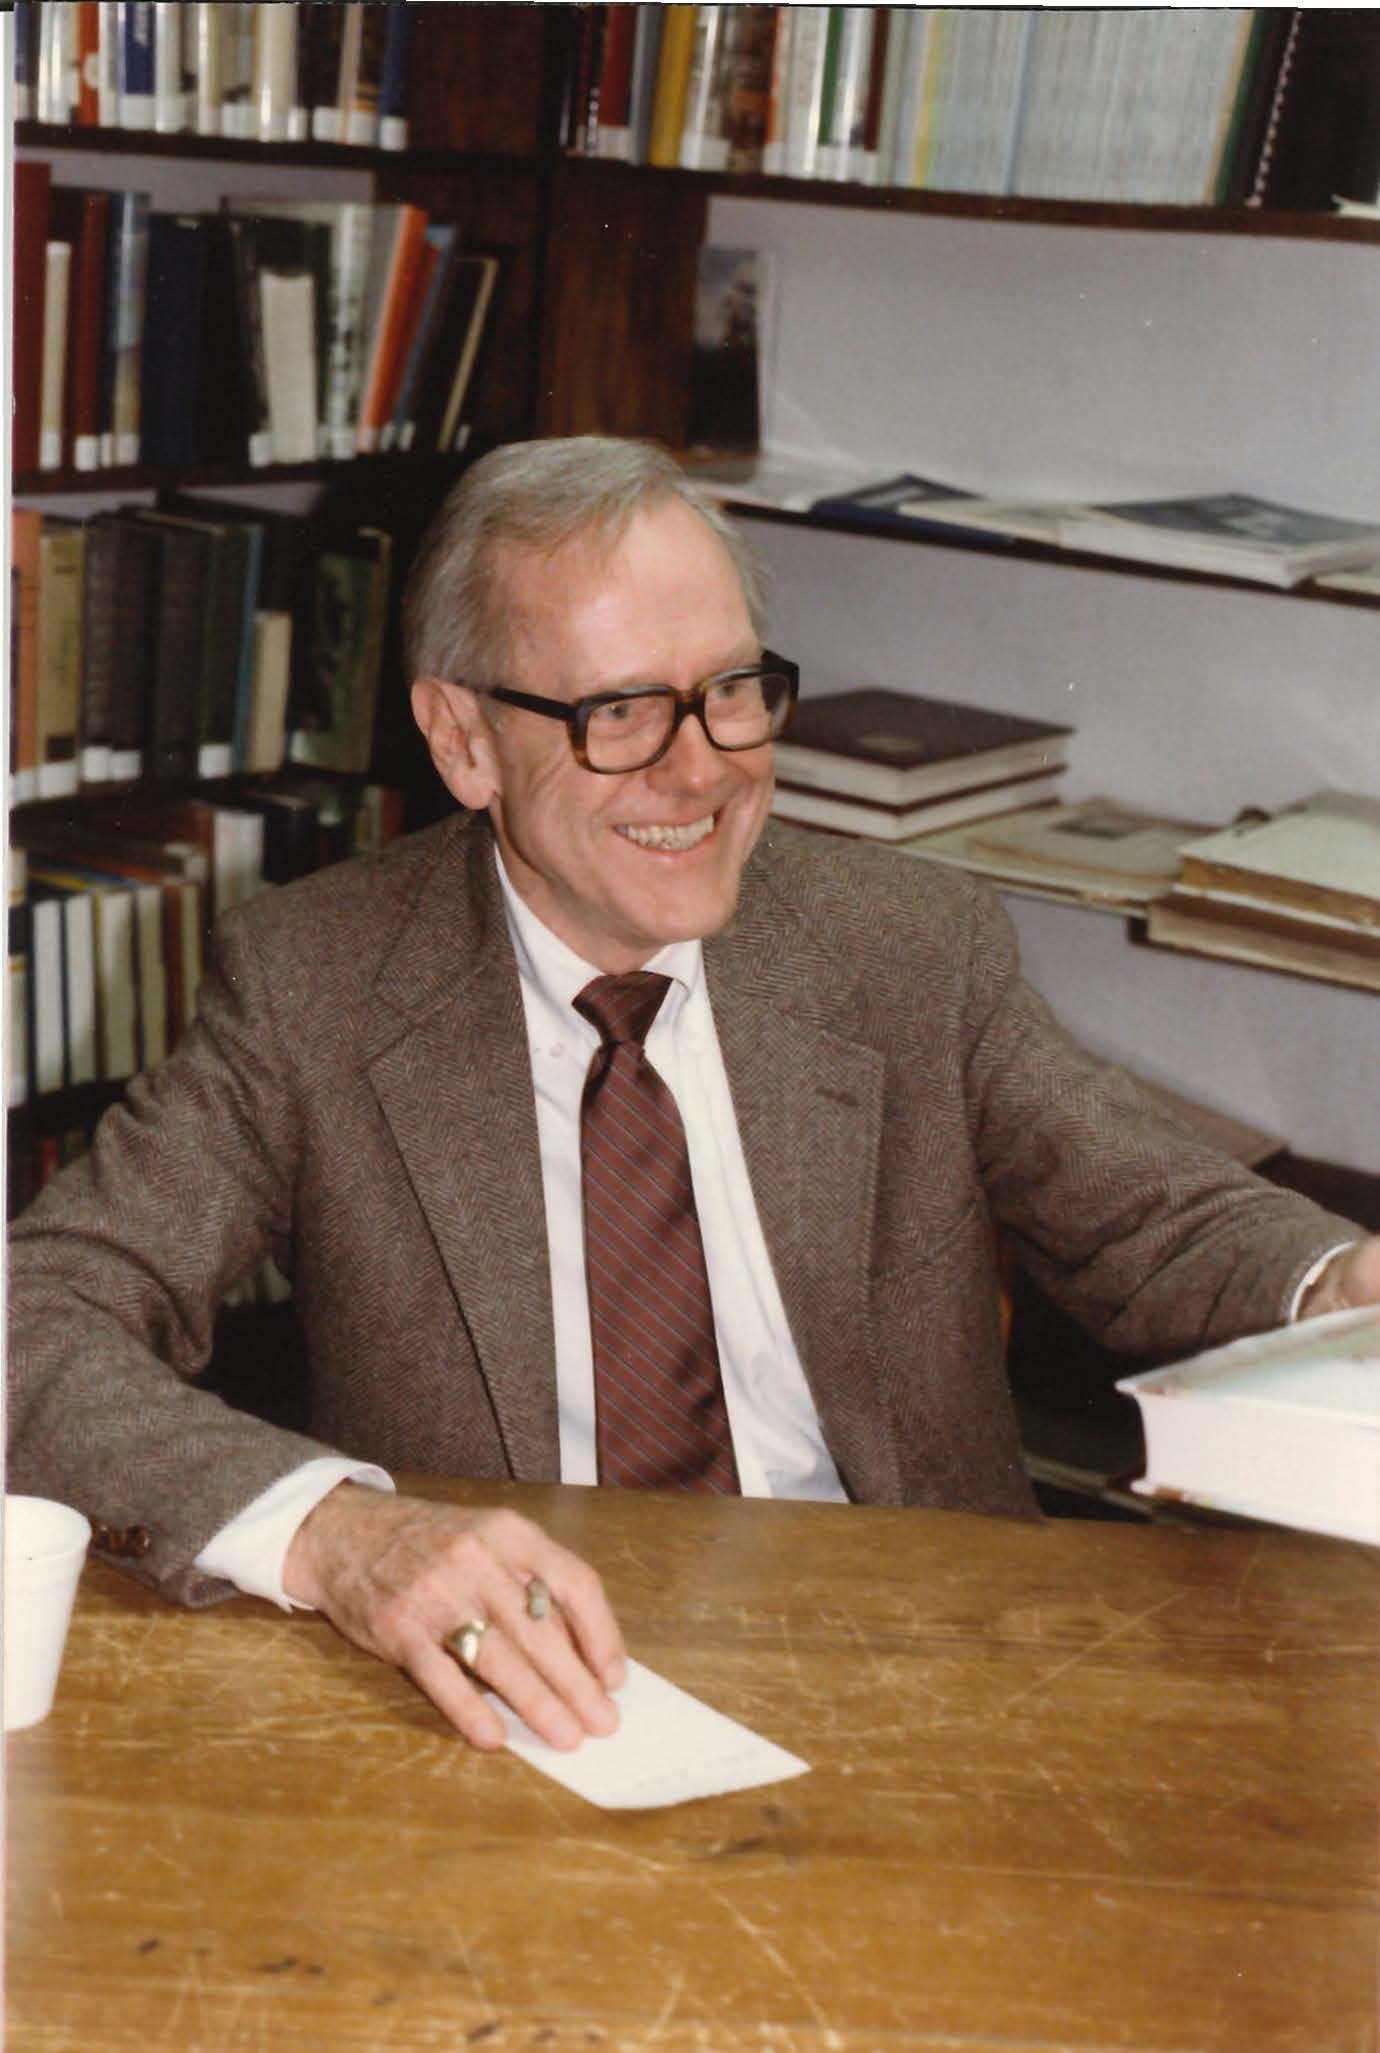 Dr. Ferrol Sams at a book signing for "The Whisper of the River" in the 1980s.